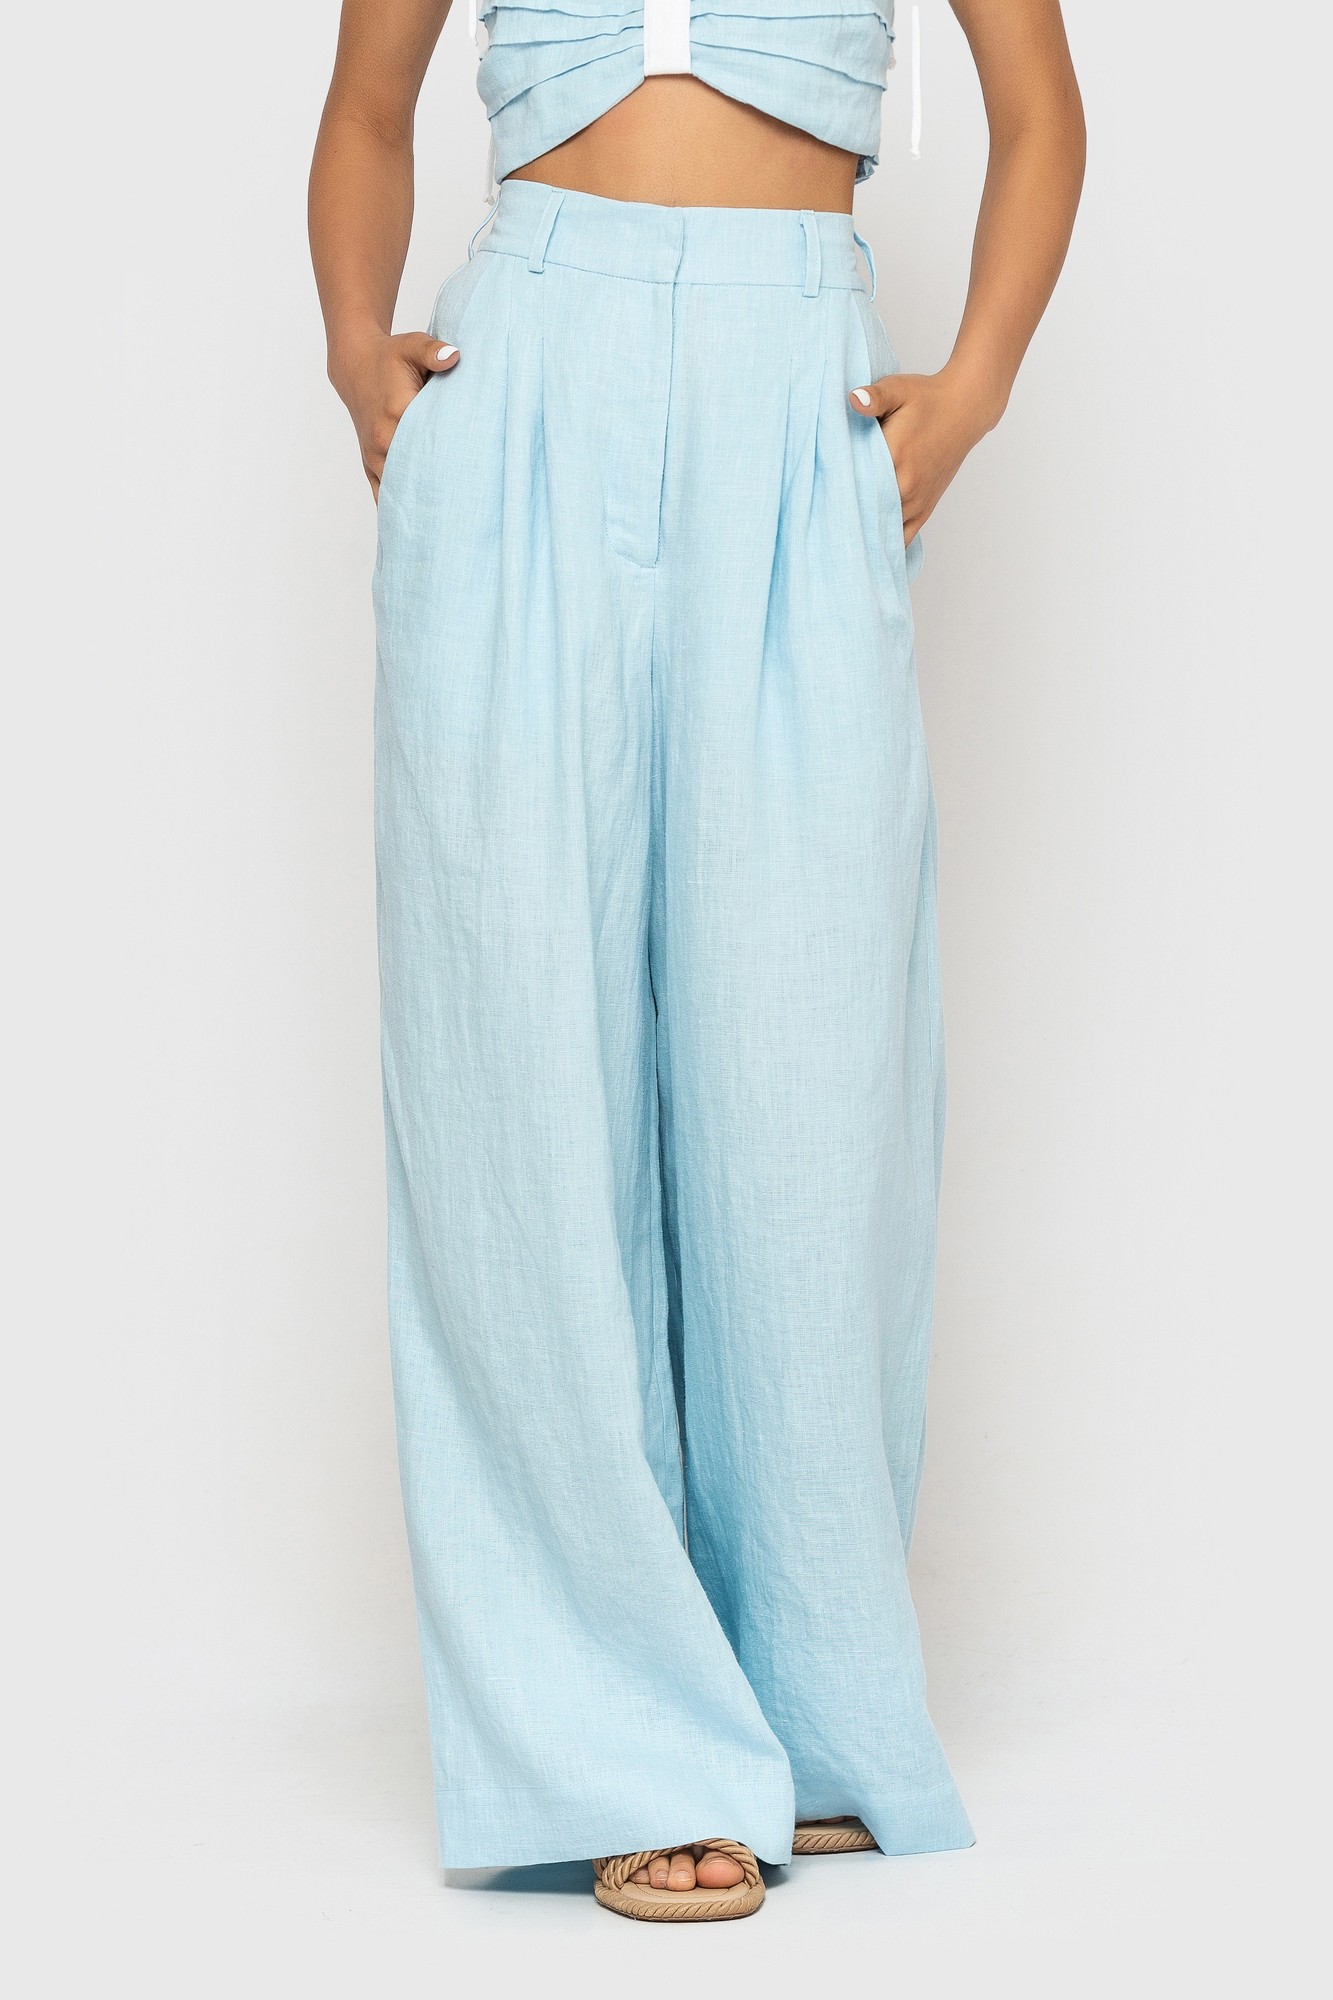 Linen Pants in Blue With High Waist